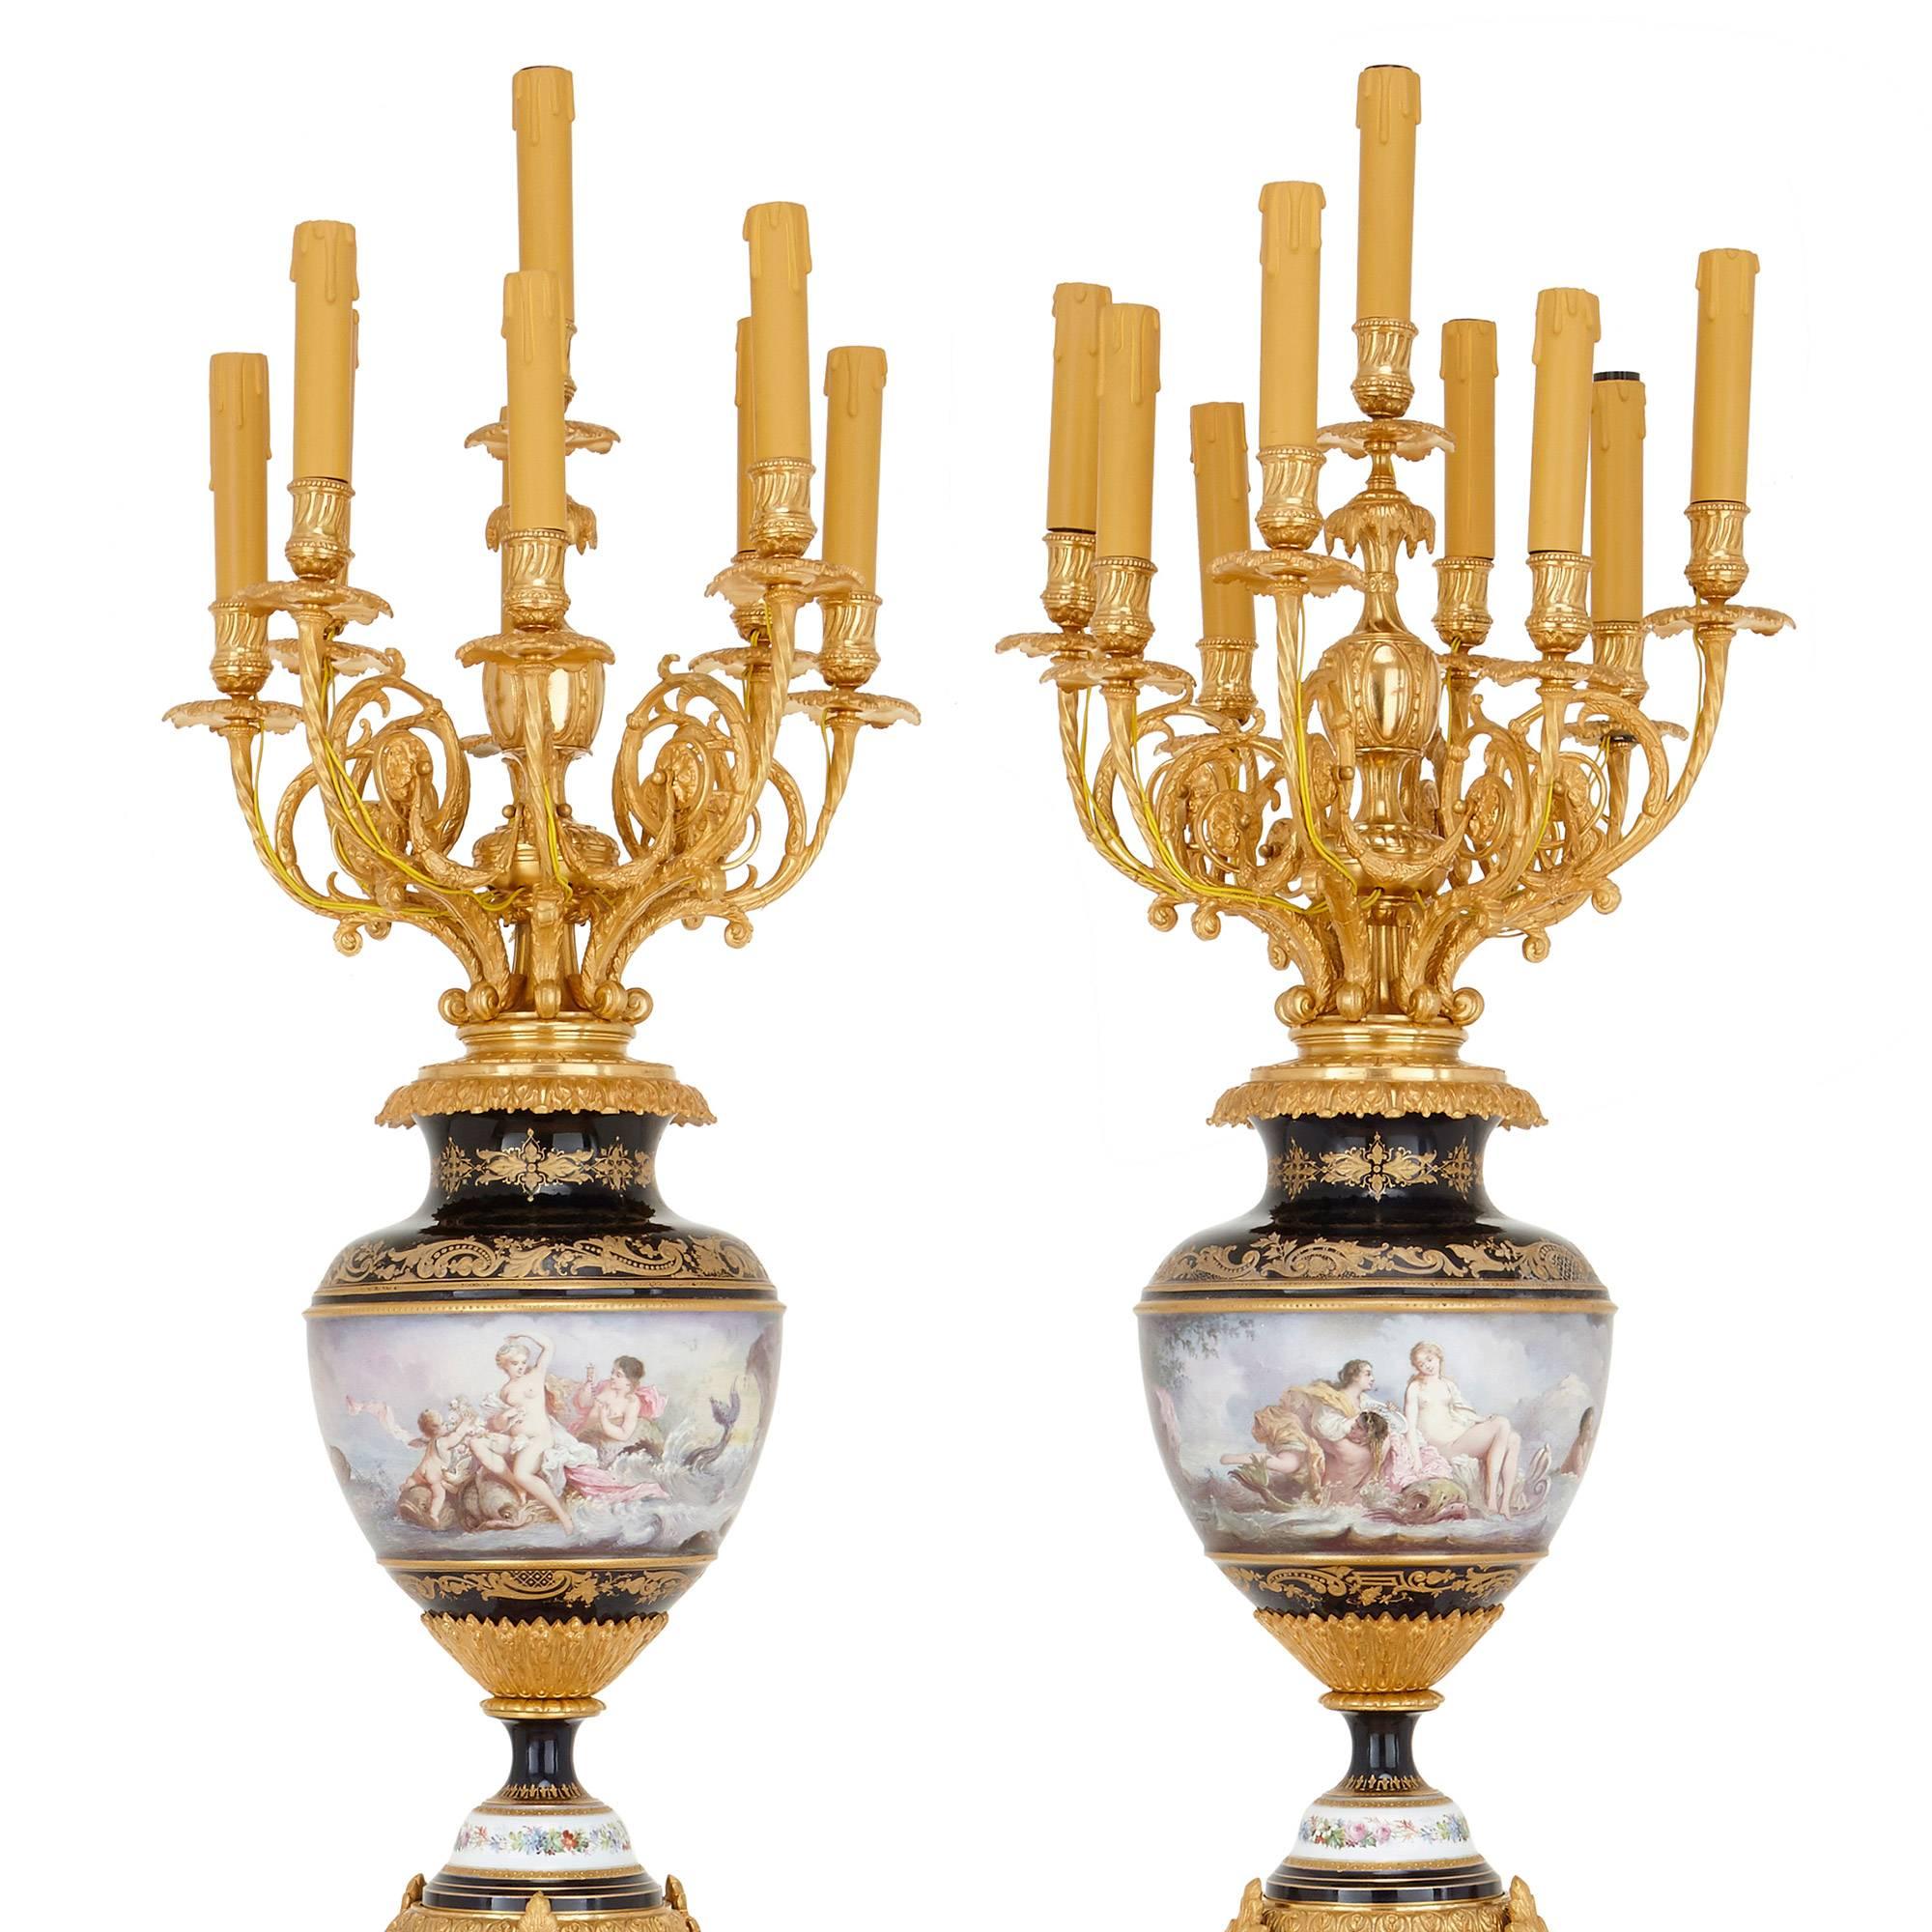 This fine pair of torcheres, or candelabra, are majestic in their size and design, and feature beautifully decorated porcelain bodies. Each torchere takes the form of a gilt bronze candelabrum with nine scrolled, foliate lights with drip pans,